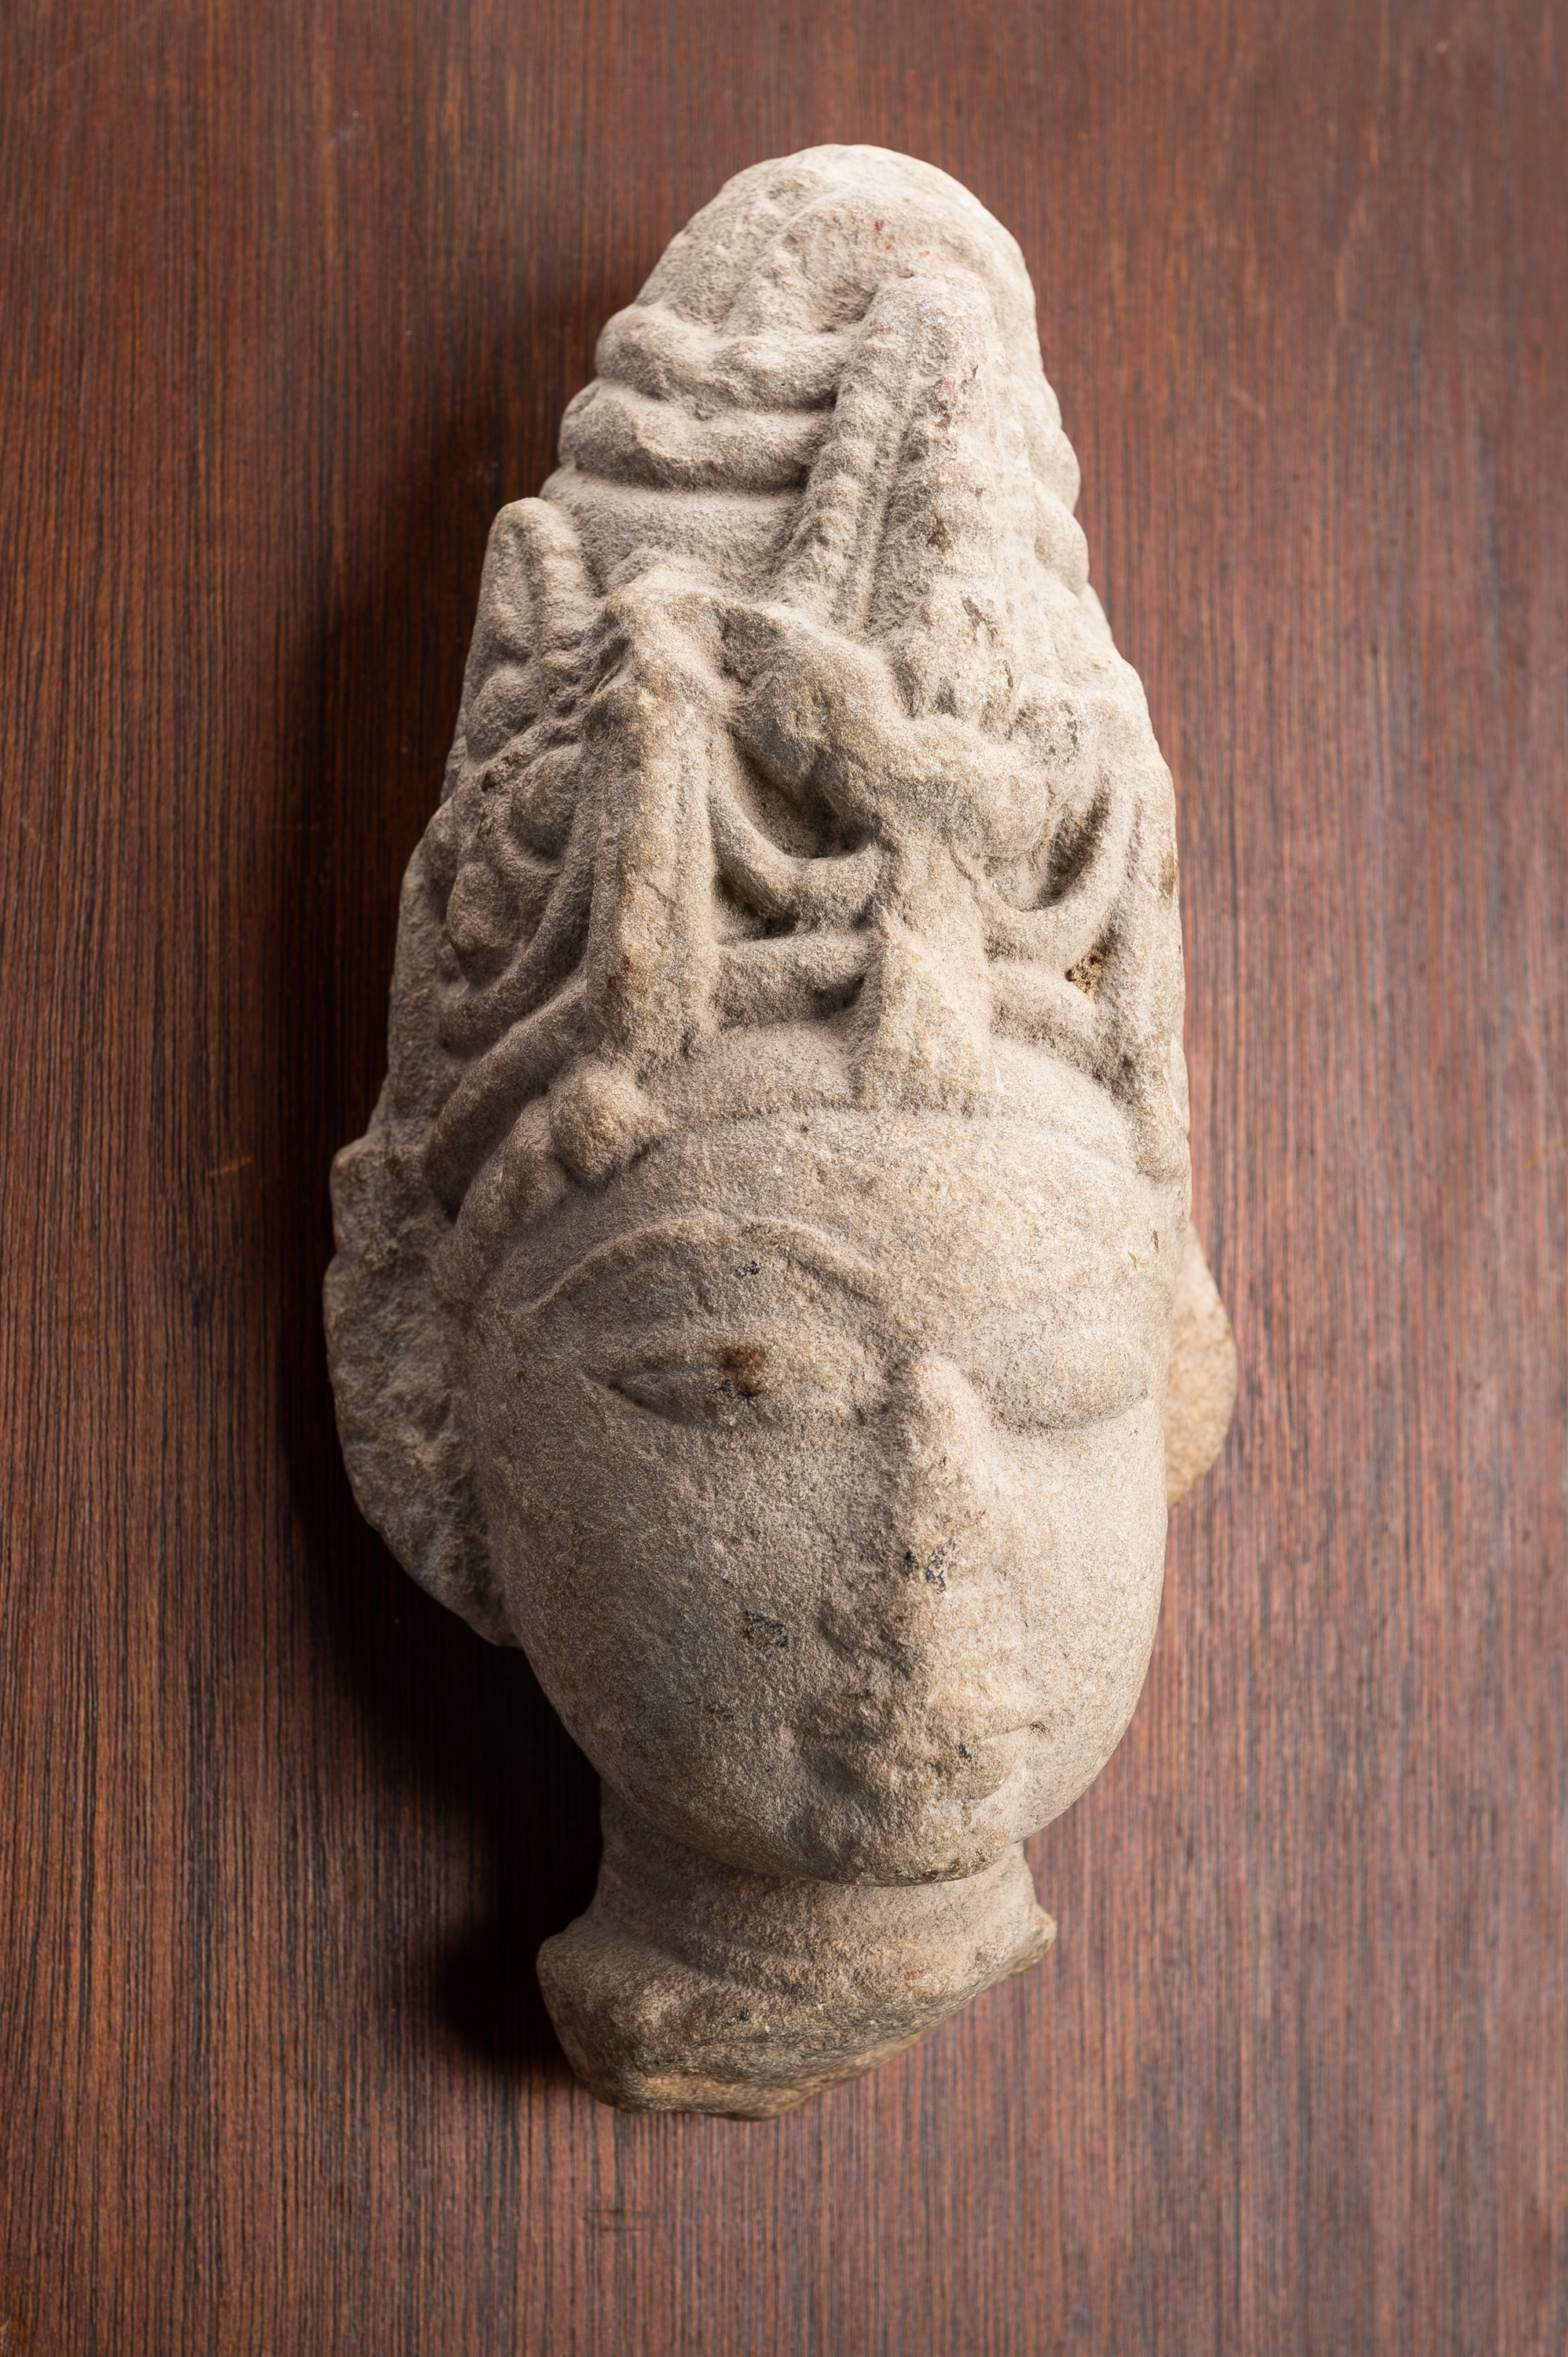 A SANDSTONE HEAD OF VISHNU WITH A MITER CROWN - Image 4 of 14